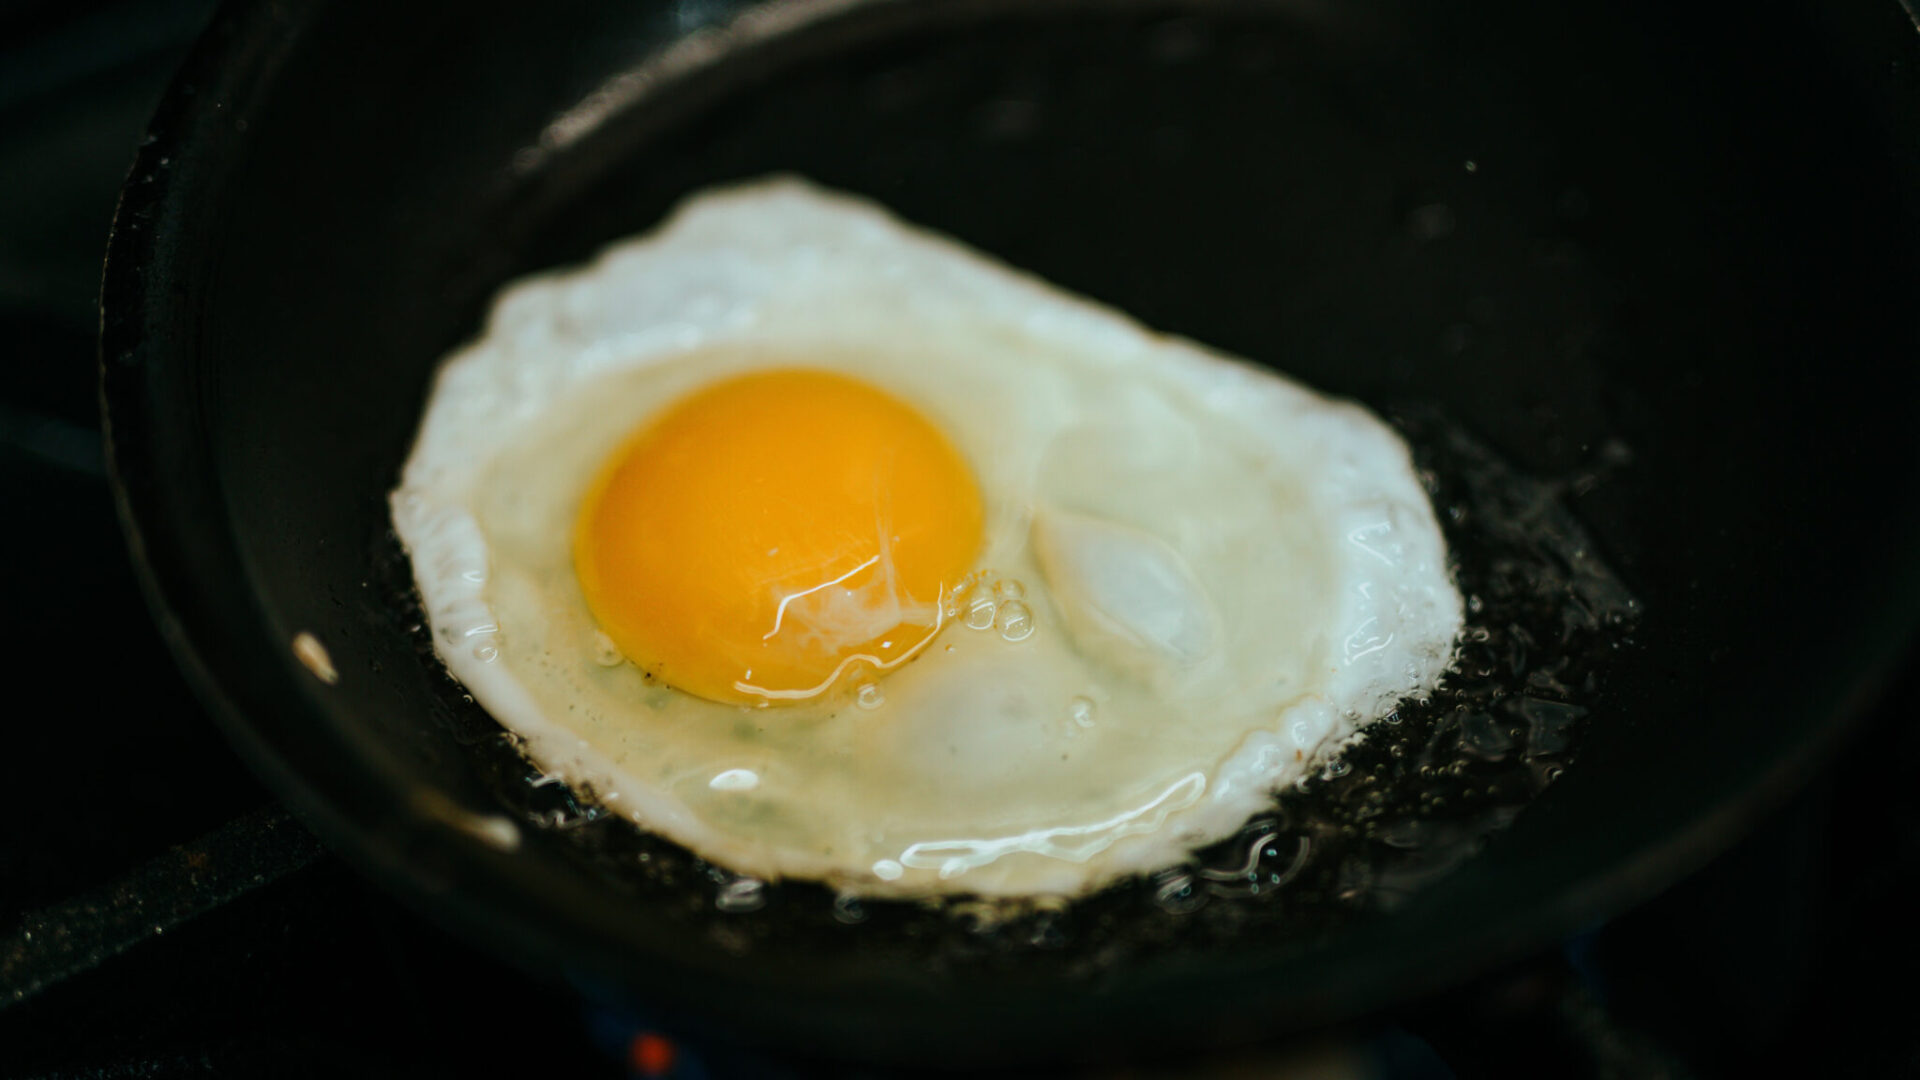 New research shows that egg whites can be transformed into a material capable of filtering water. Photo by Nathan Dumlao